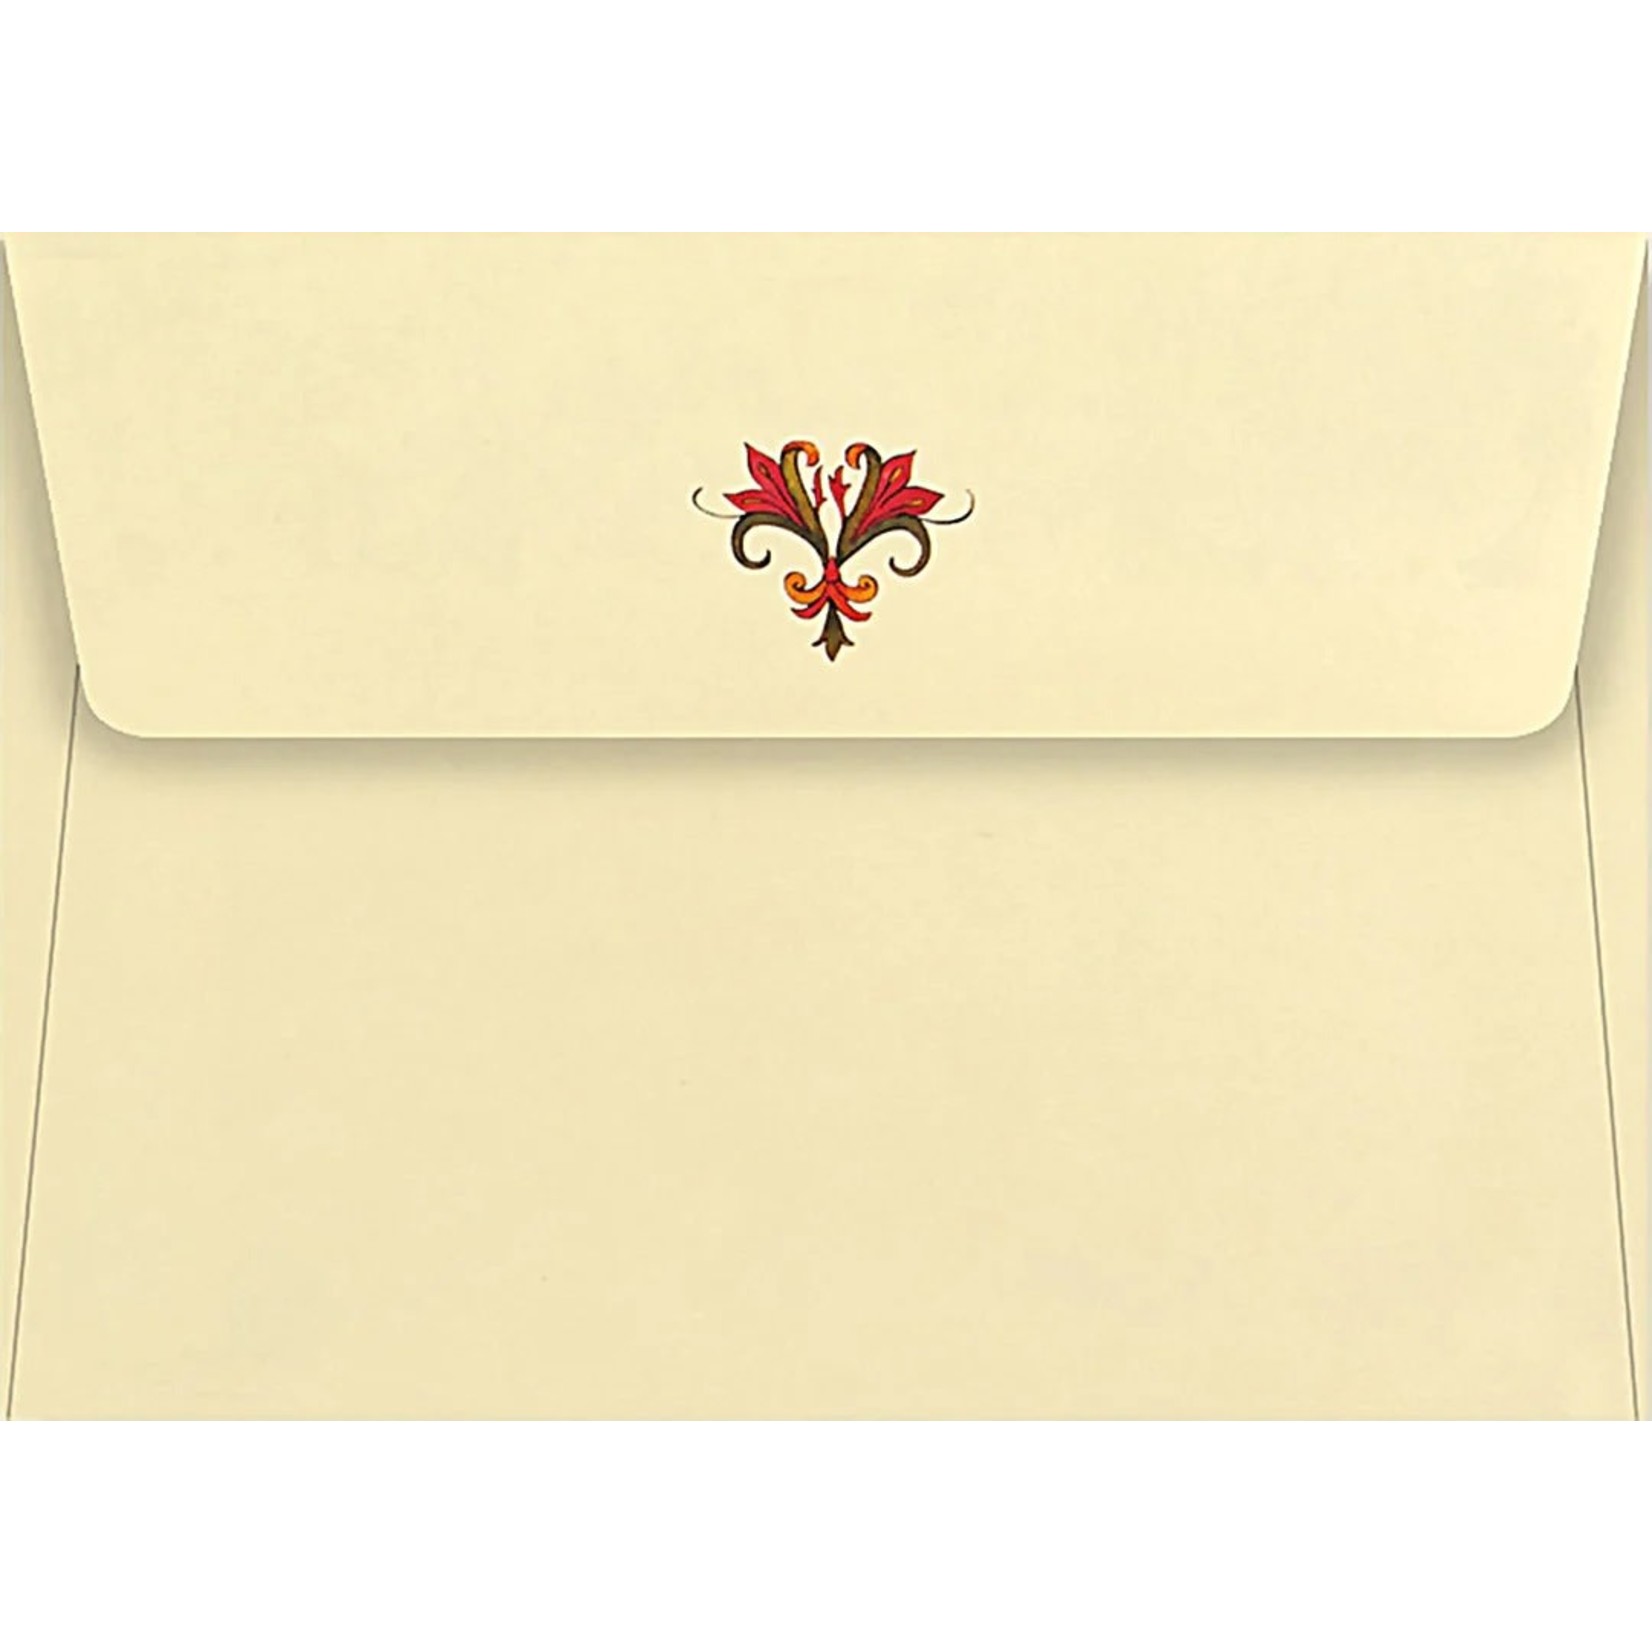 Peter Pauper Press Boxed Note Cards: Florentine